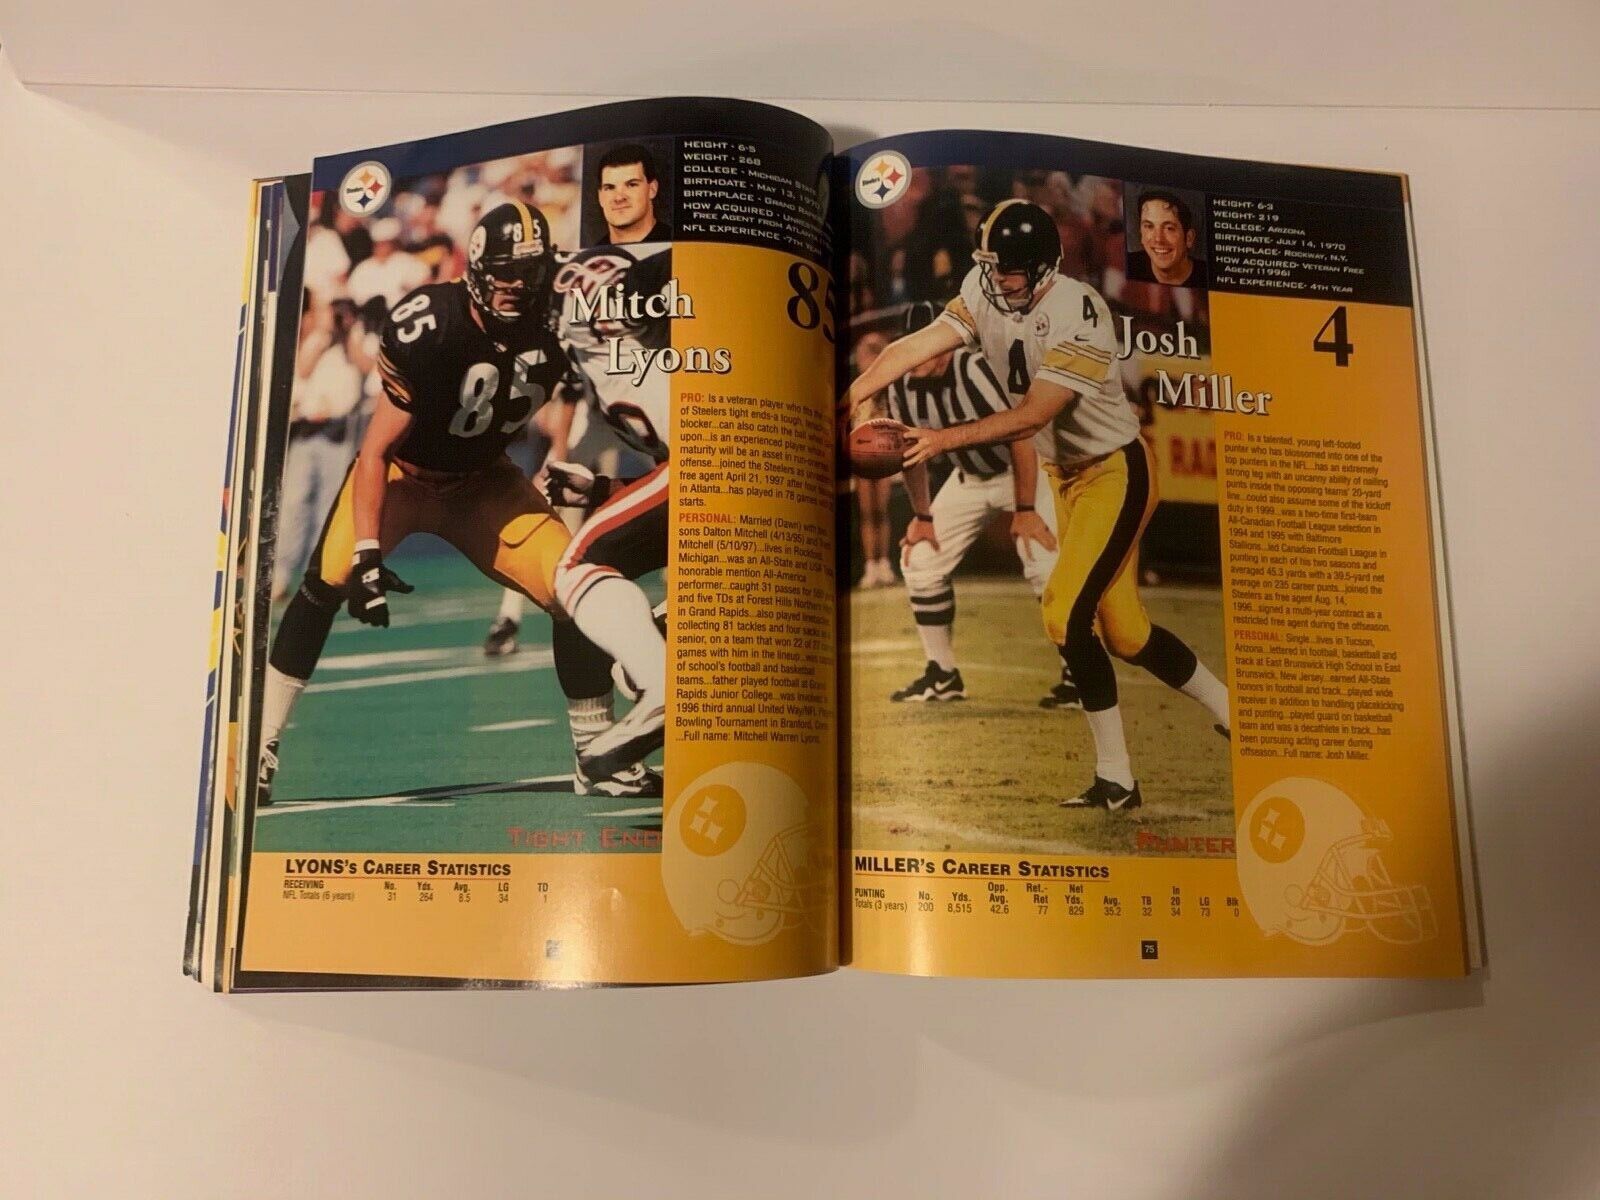 Pittsburgh Steelers 1999 Yearbook Autographed by Dermontti Dawson On Cover